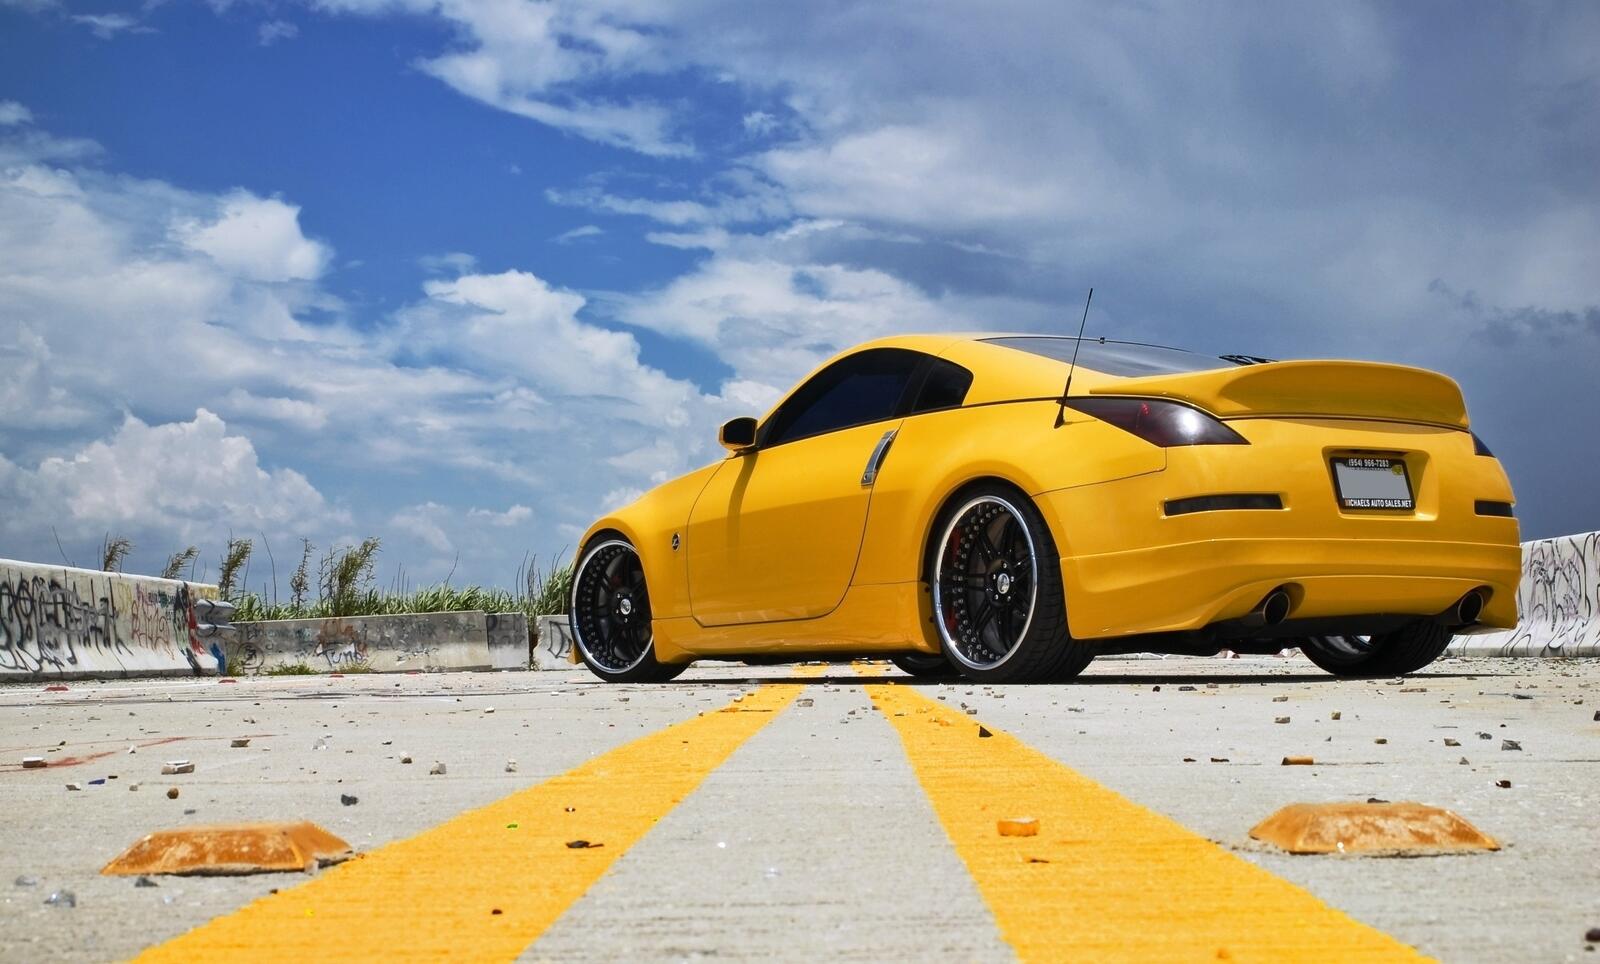 Wallpapers nissan 370z yellow at the training ground on the desktop